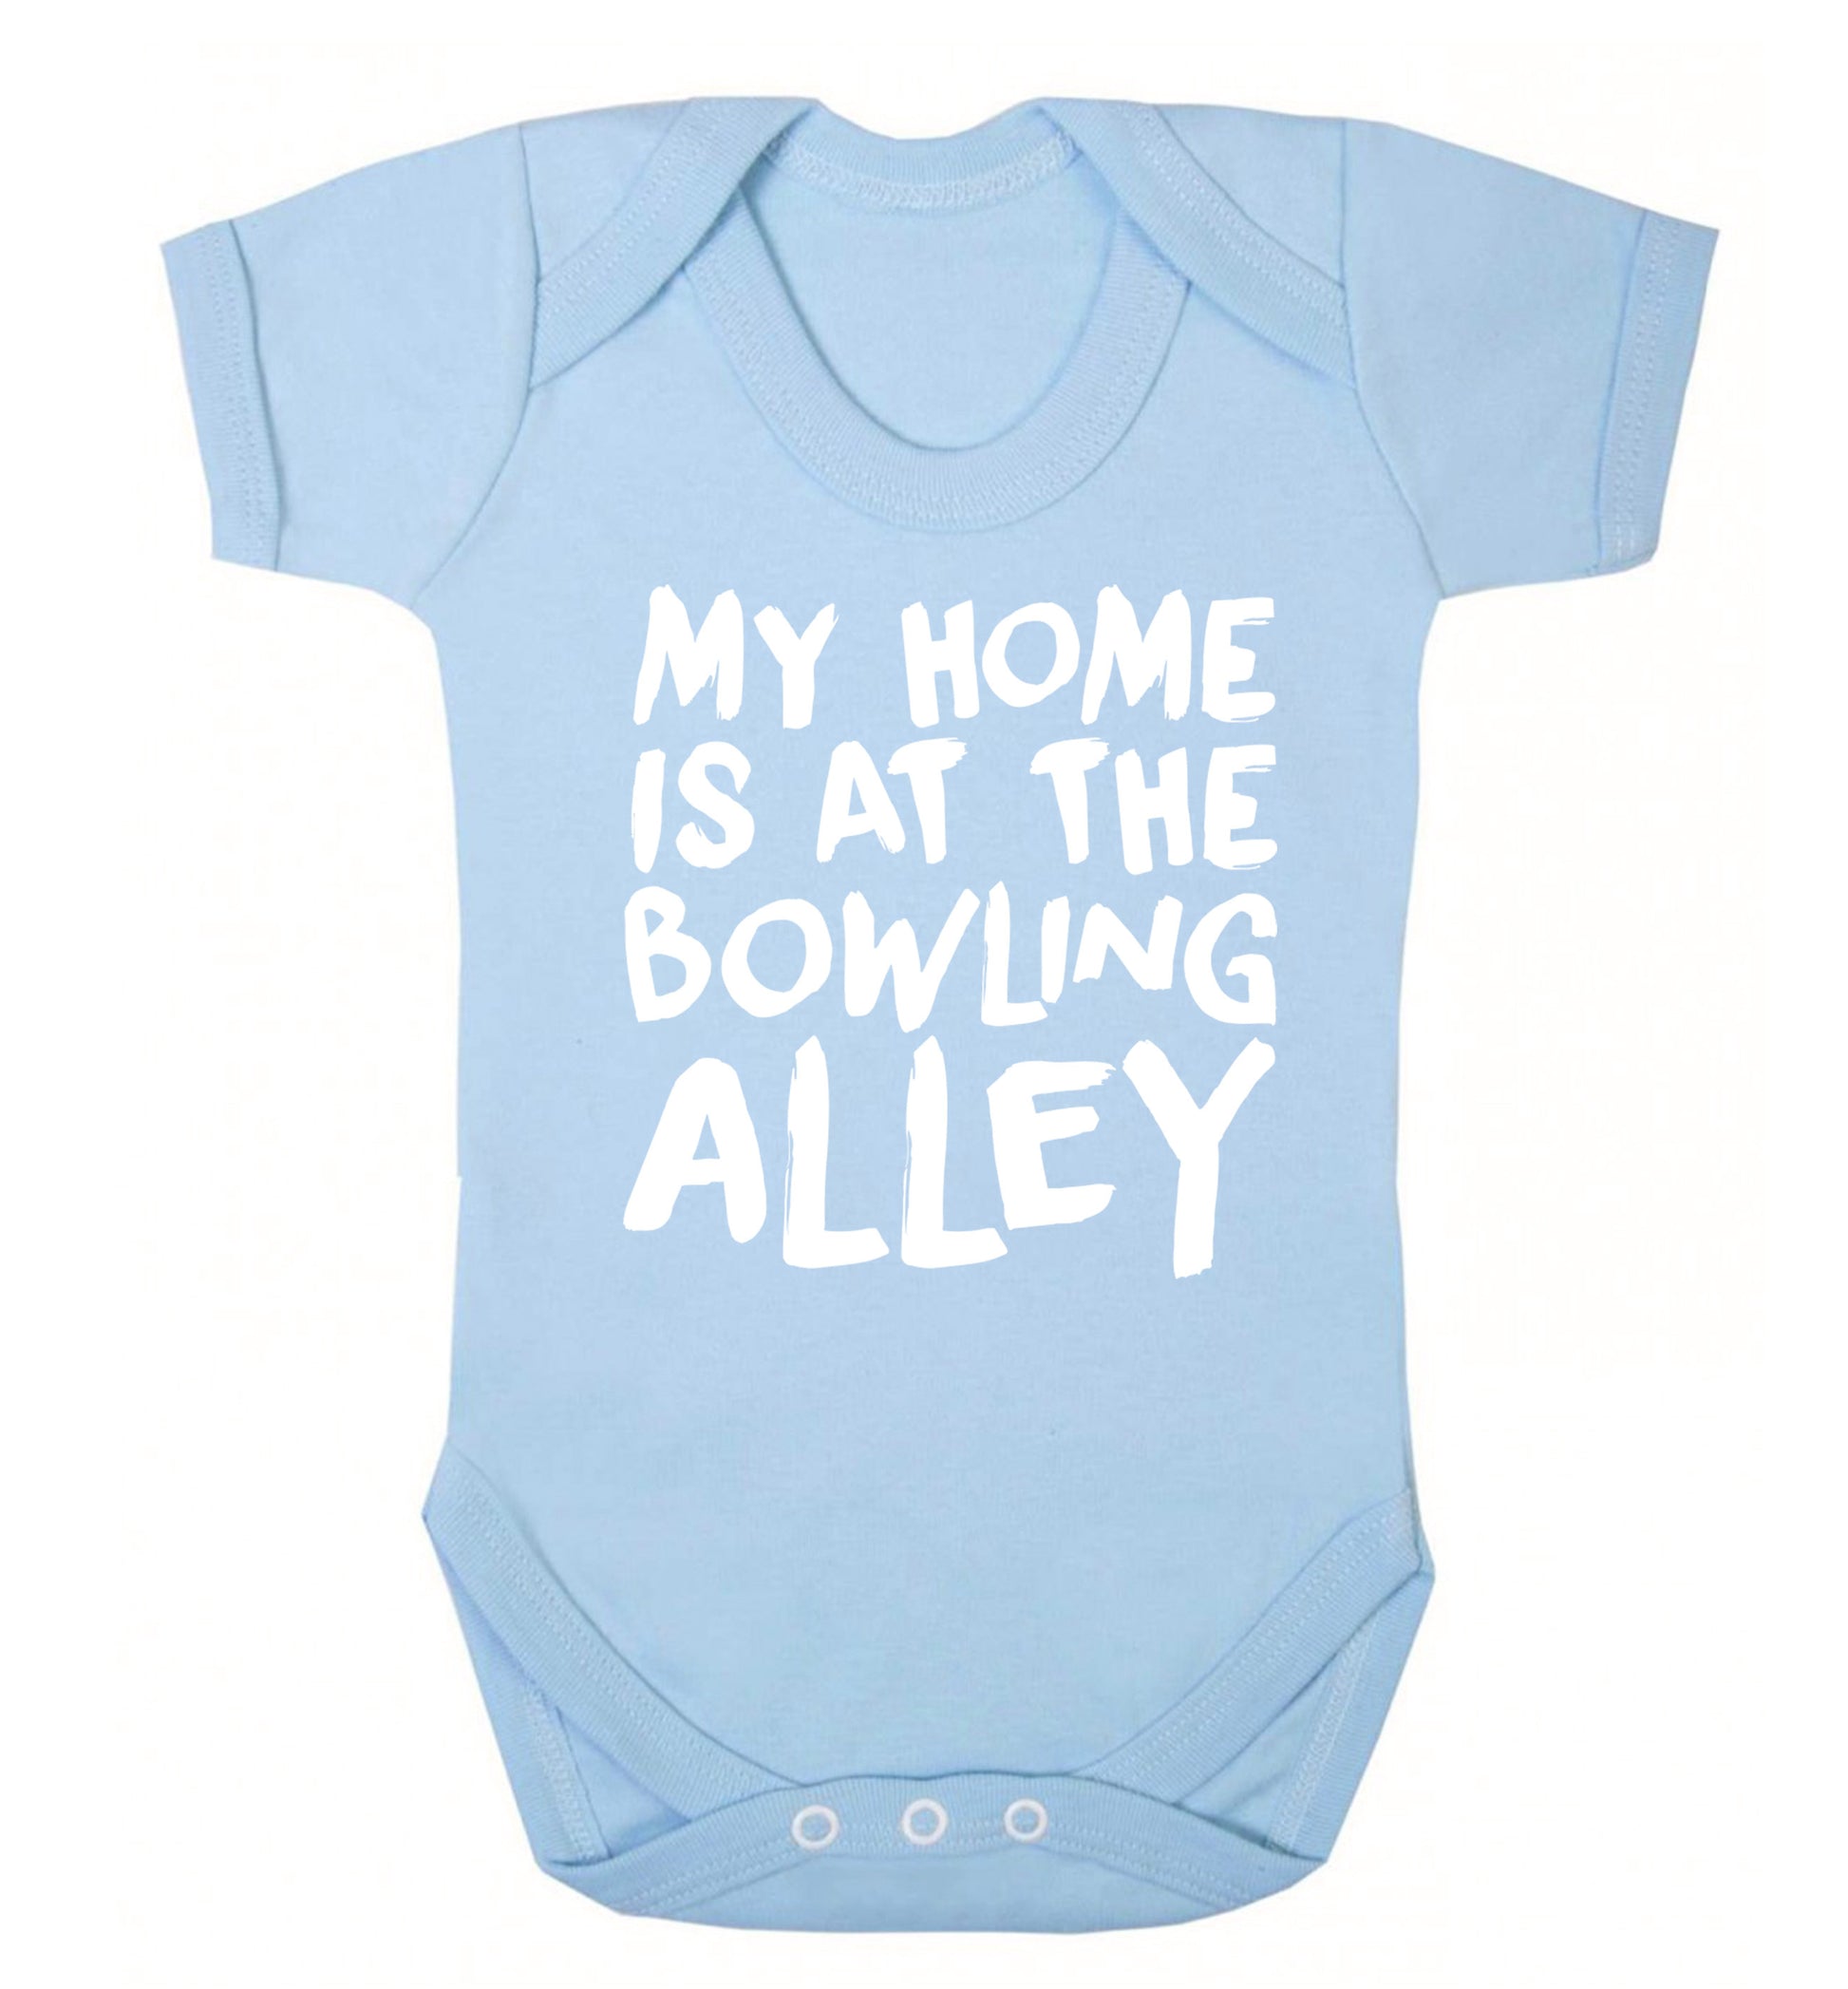 My home is at the bowling alley Baby Vest pale blue 18-24 months